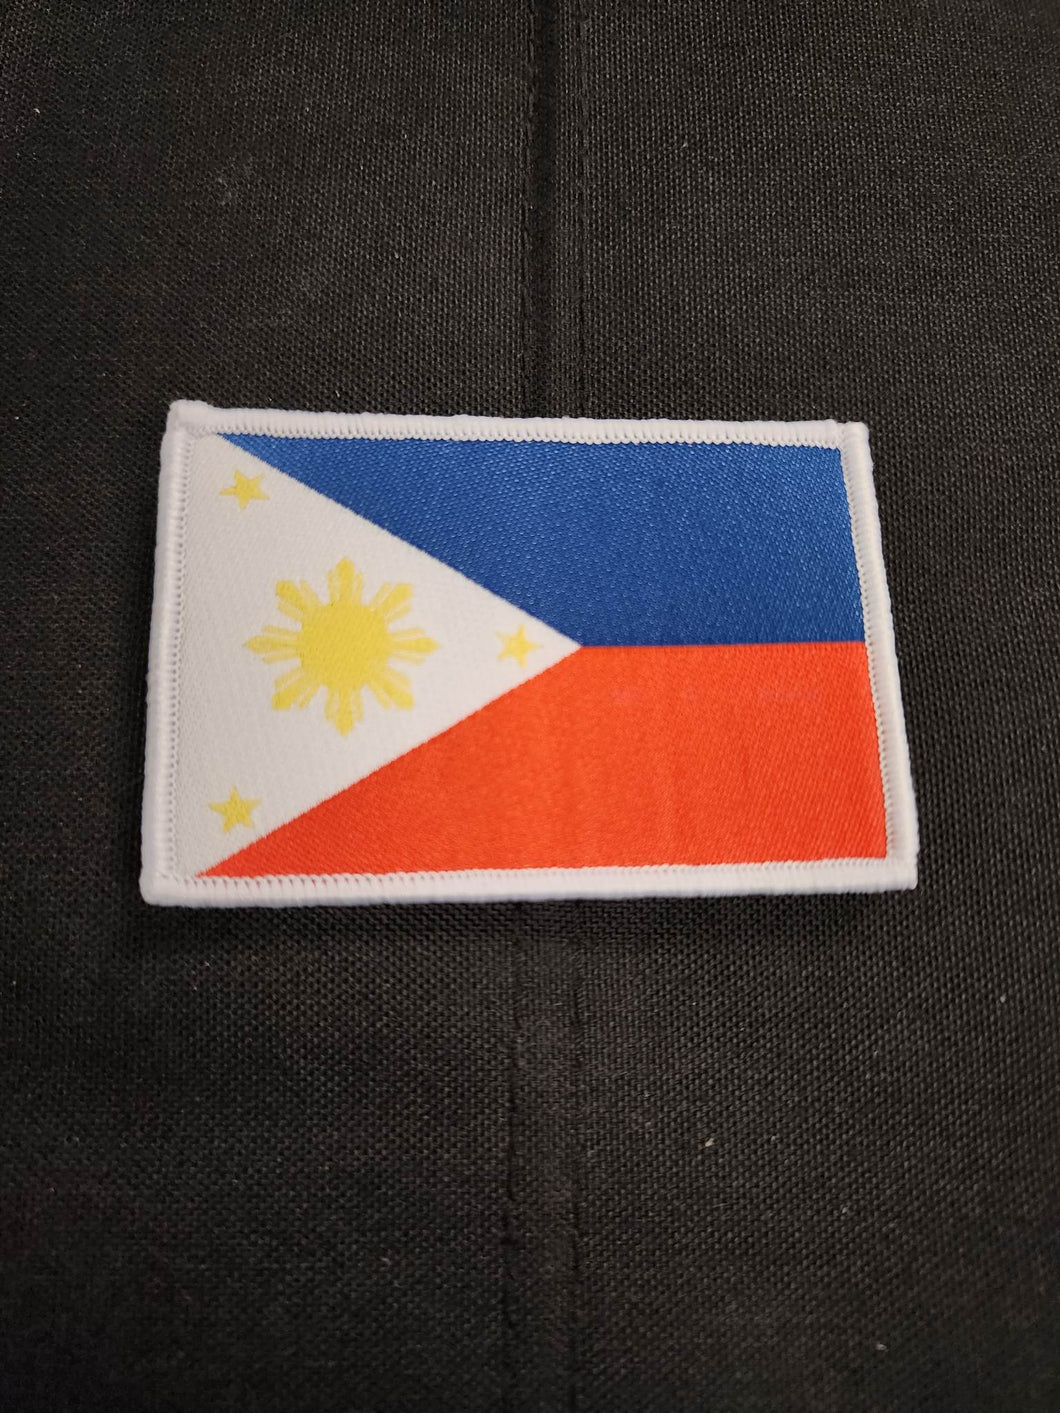 Phillippines Flag Woven Full Color